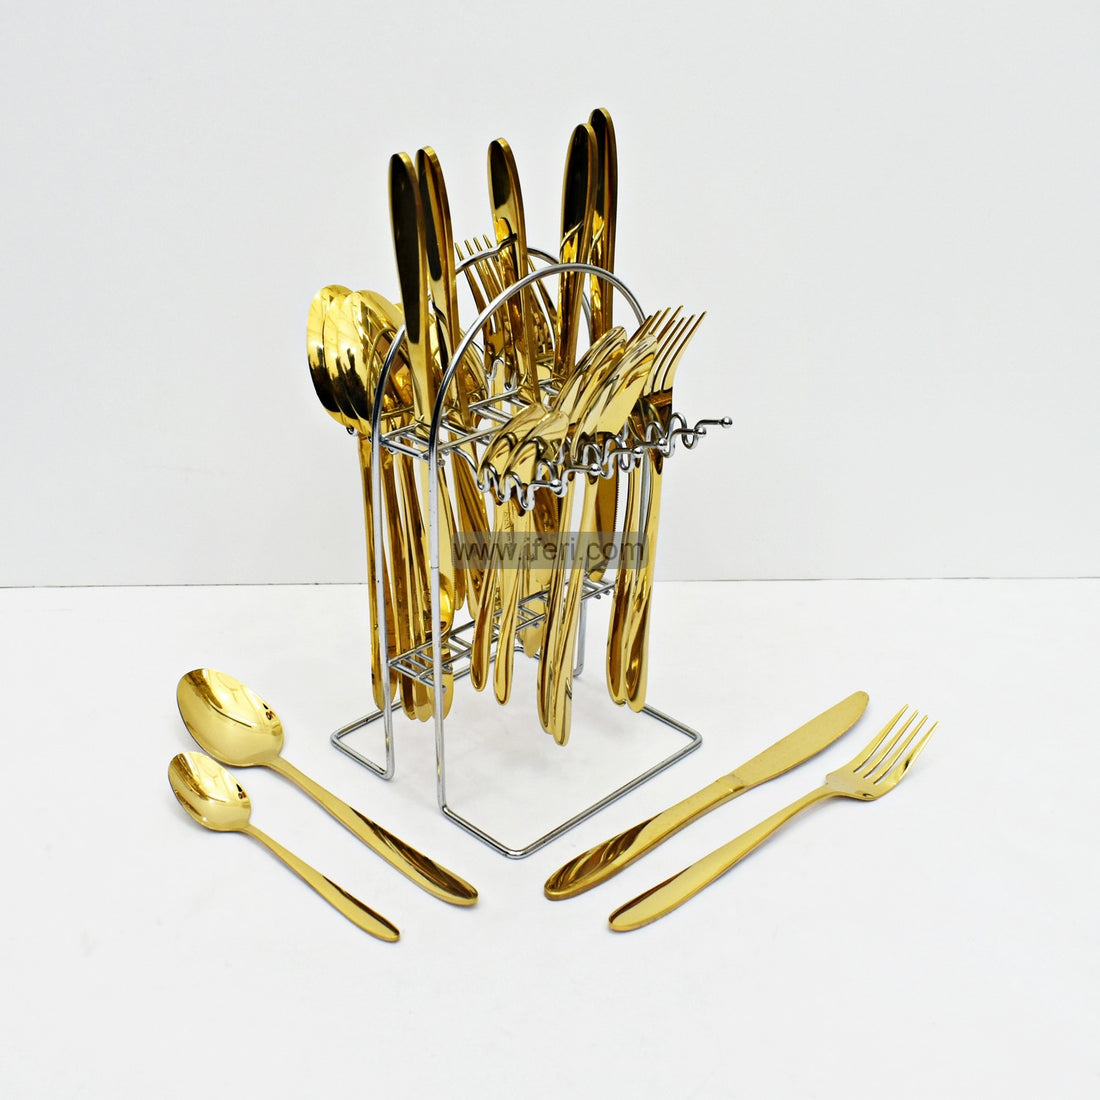 Buy 24 Pcs Stainless Steel Cutlery Set through Online from iferi.com in Bangladesh